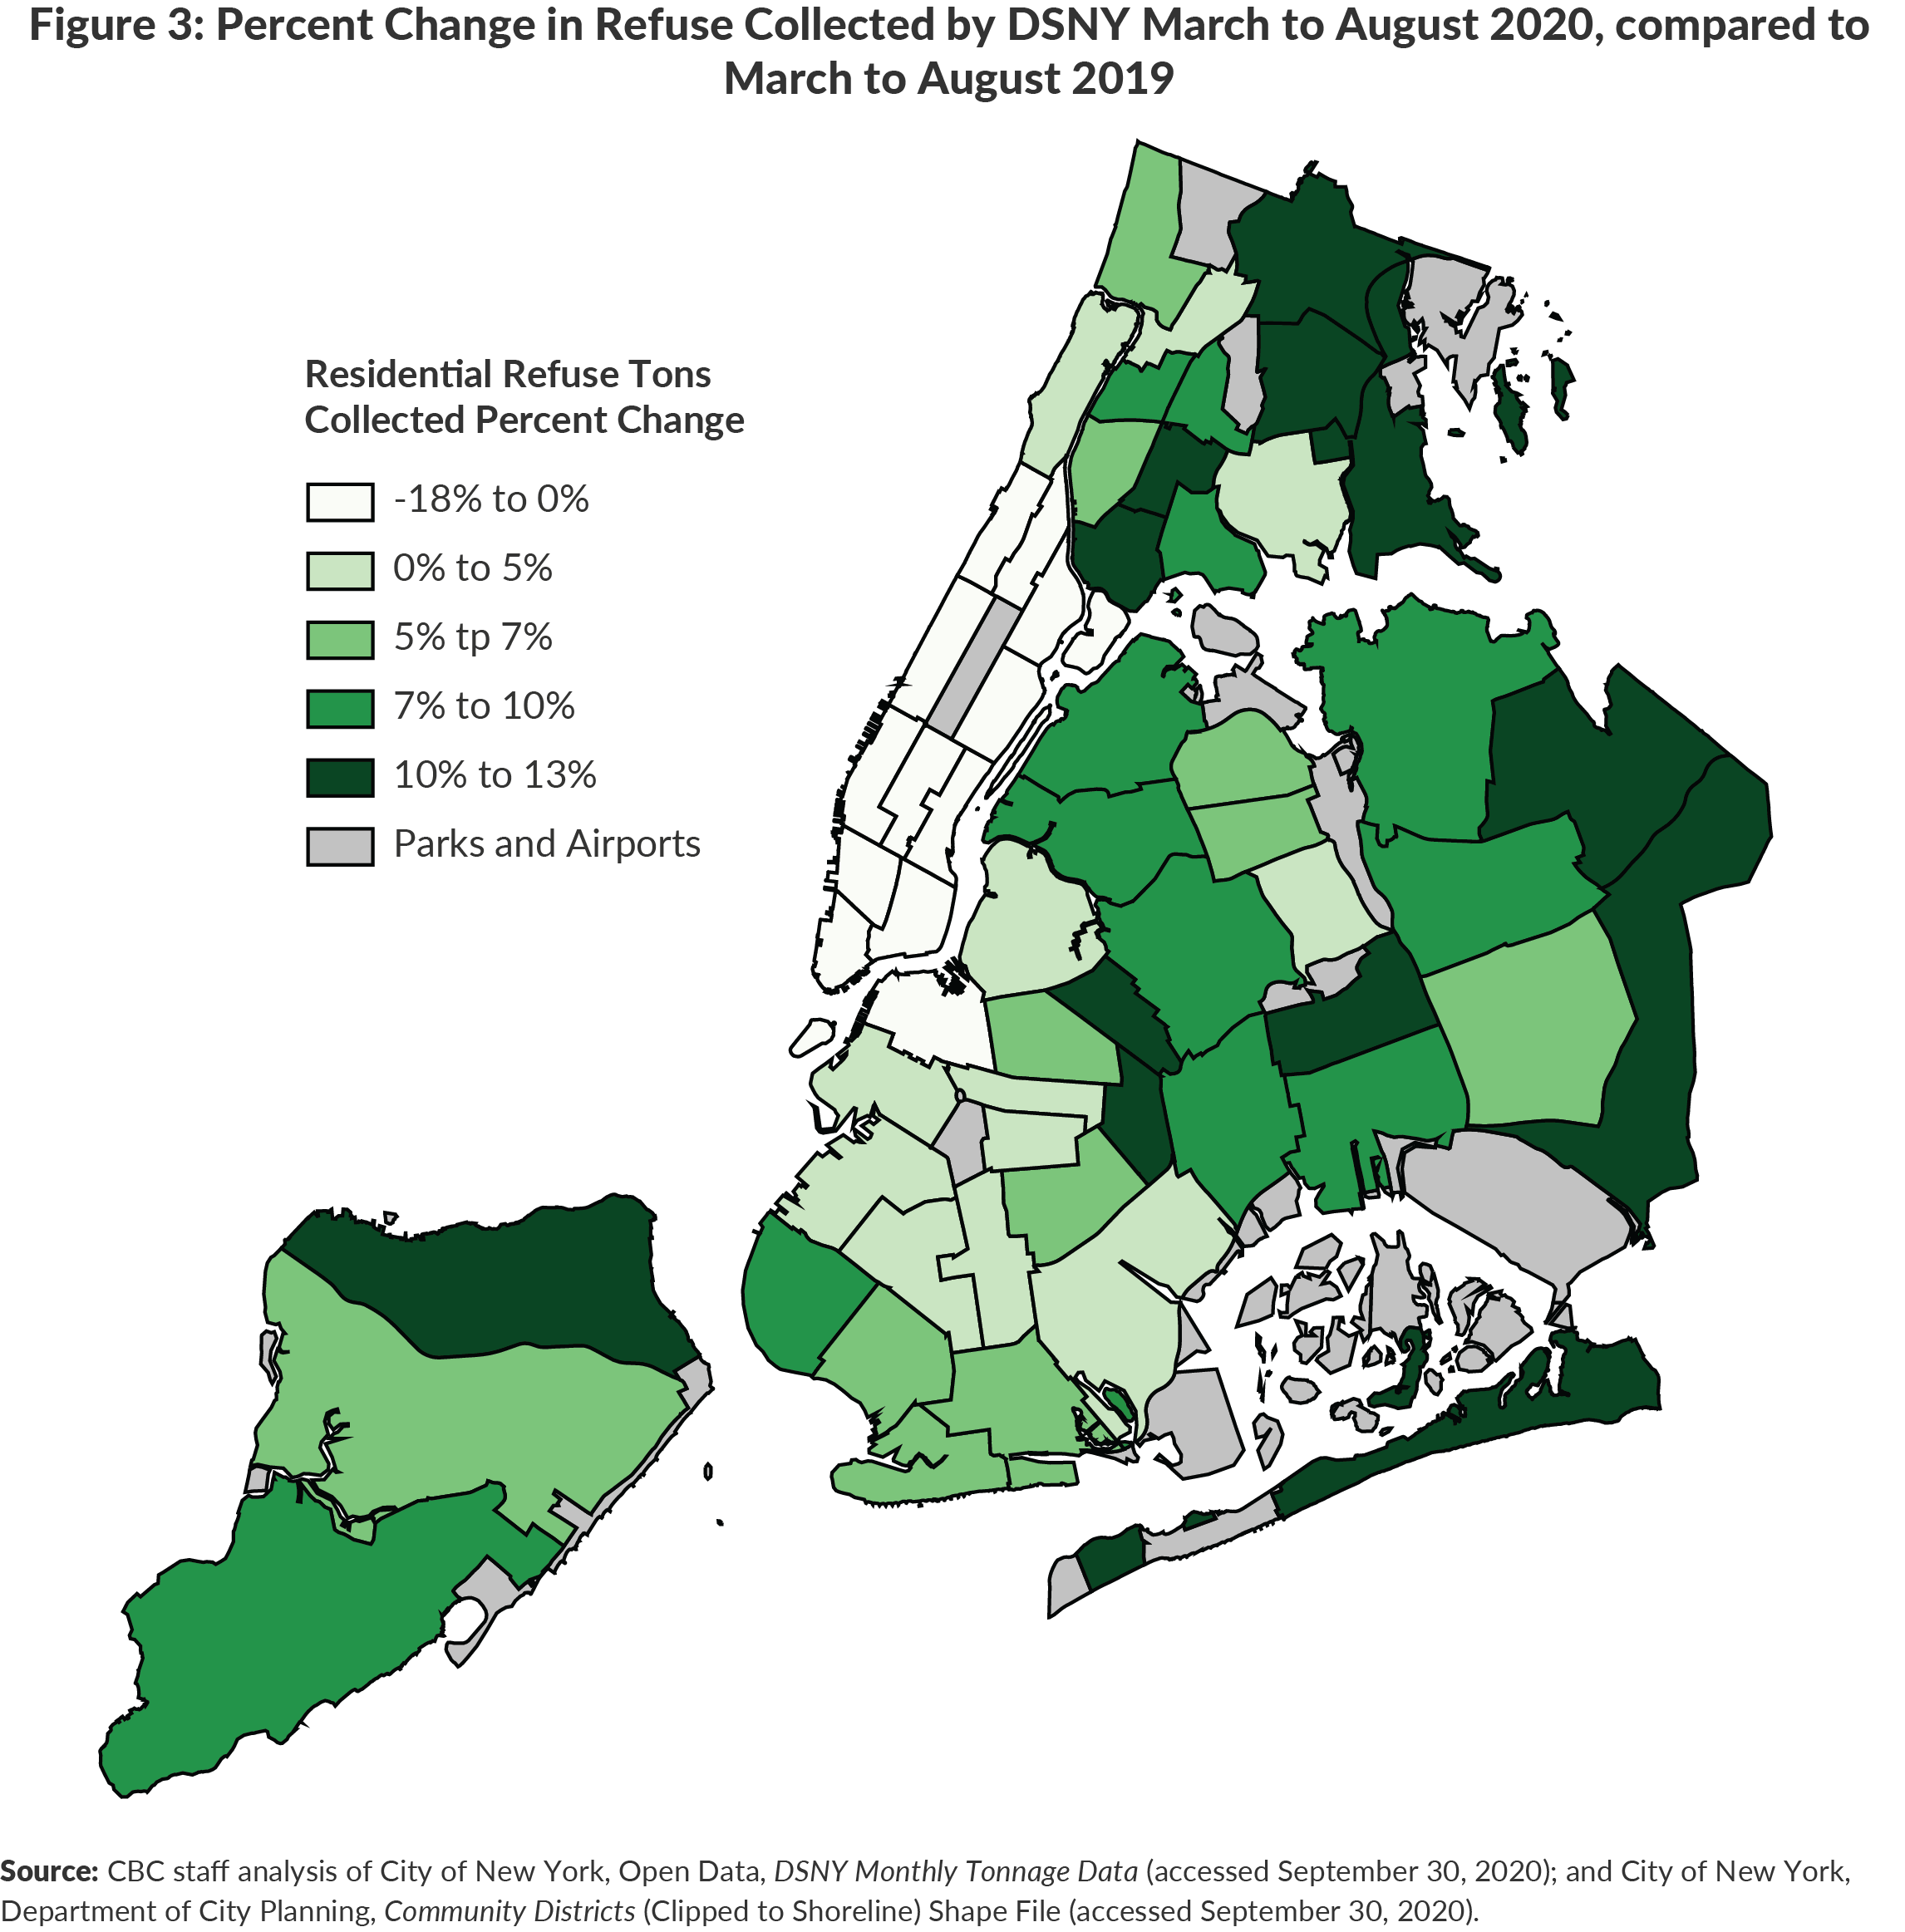 Figure 3: Percent Change in Refuse Collected by DSNY March to August 2020, compared toMarch to August 2019